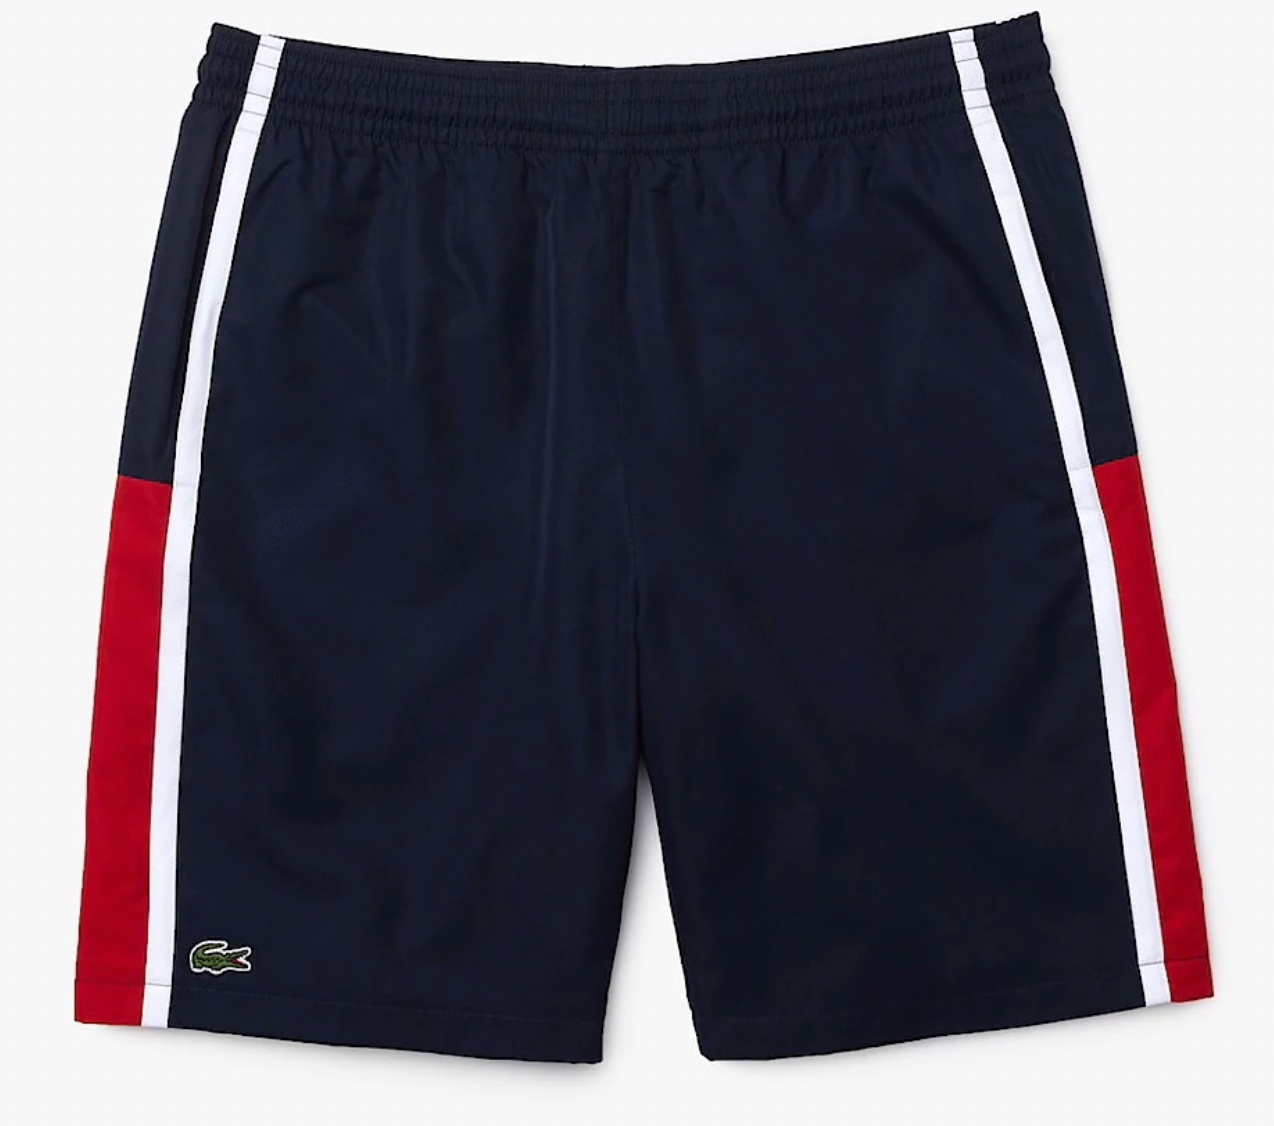 LACOSTE - NAVY, RED AND WHITE SHORTS - Clique Apparel